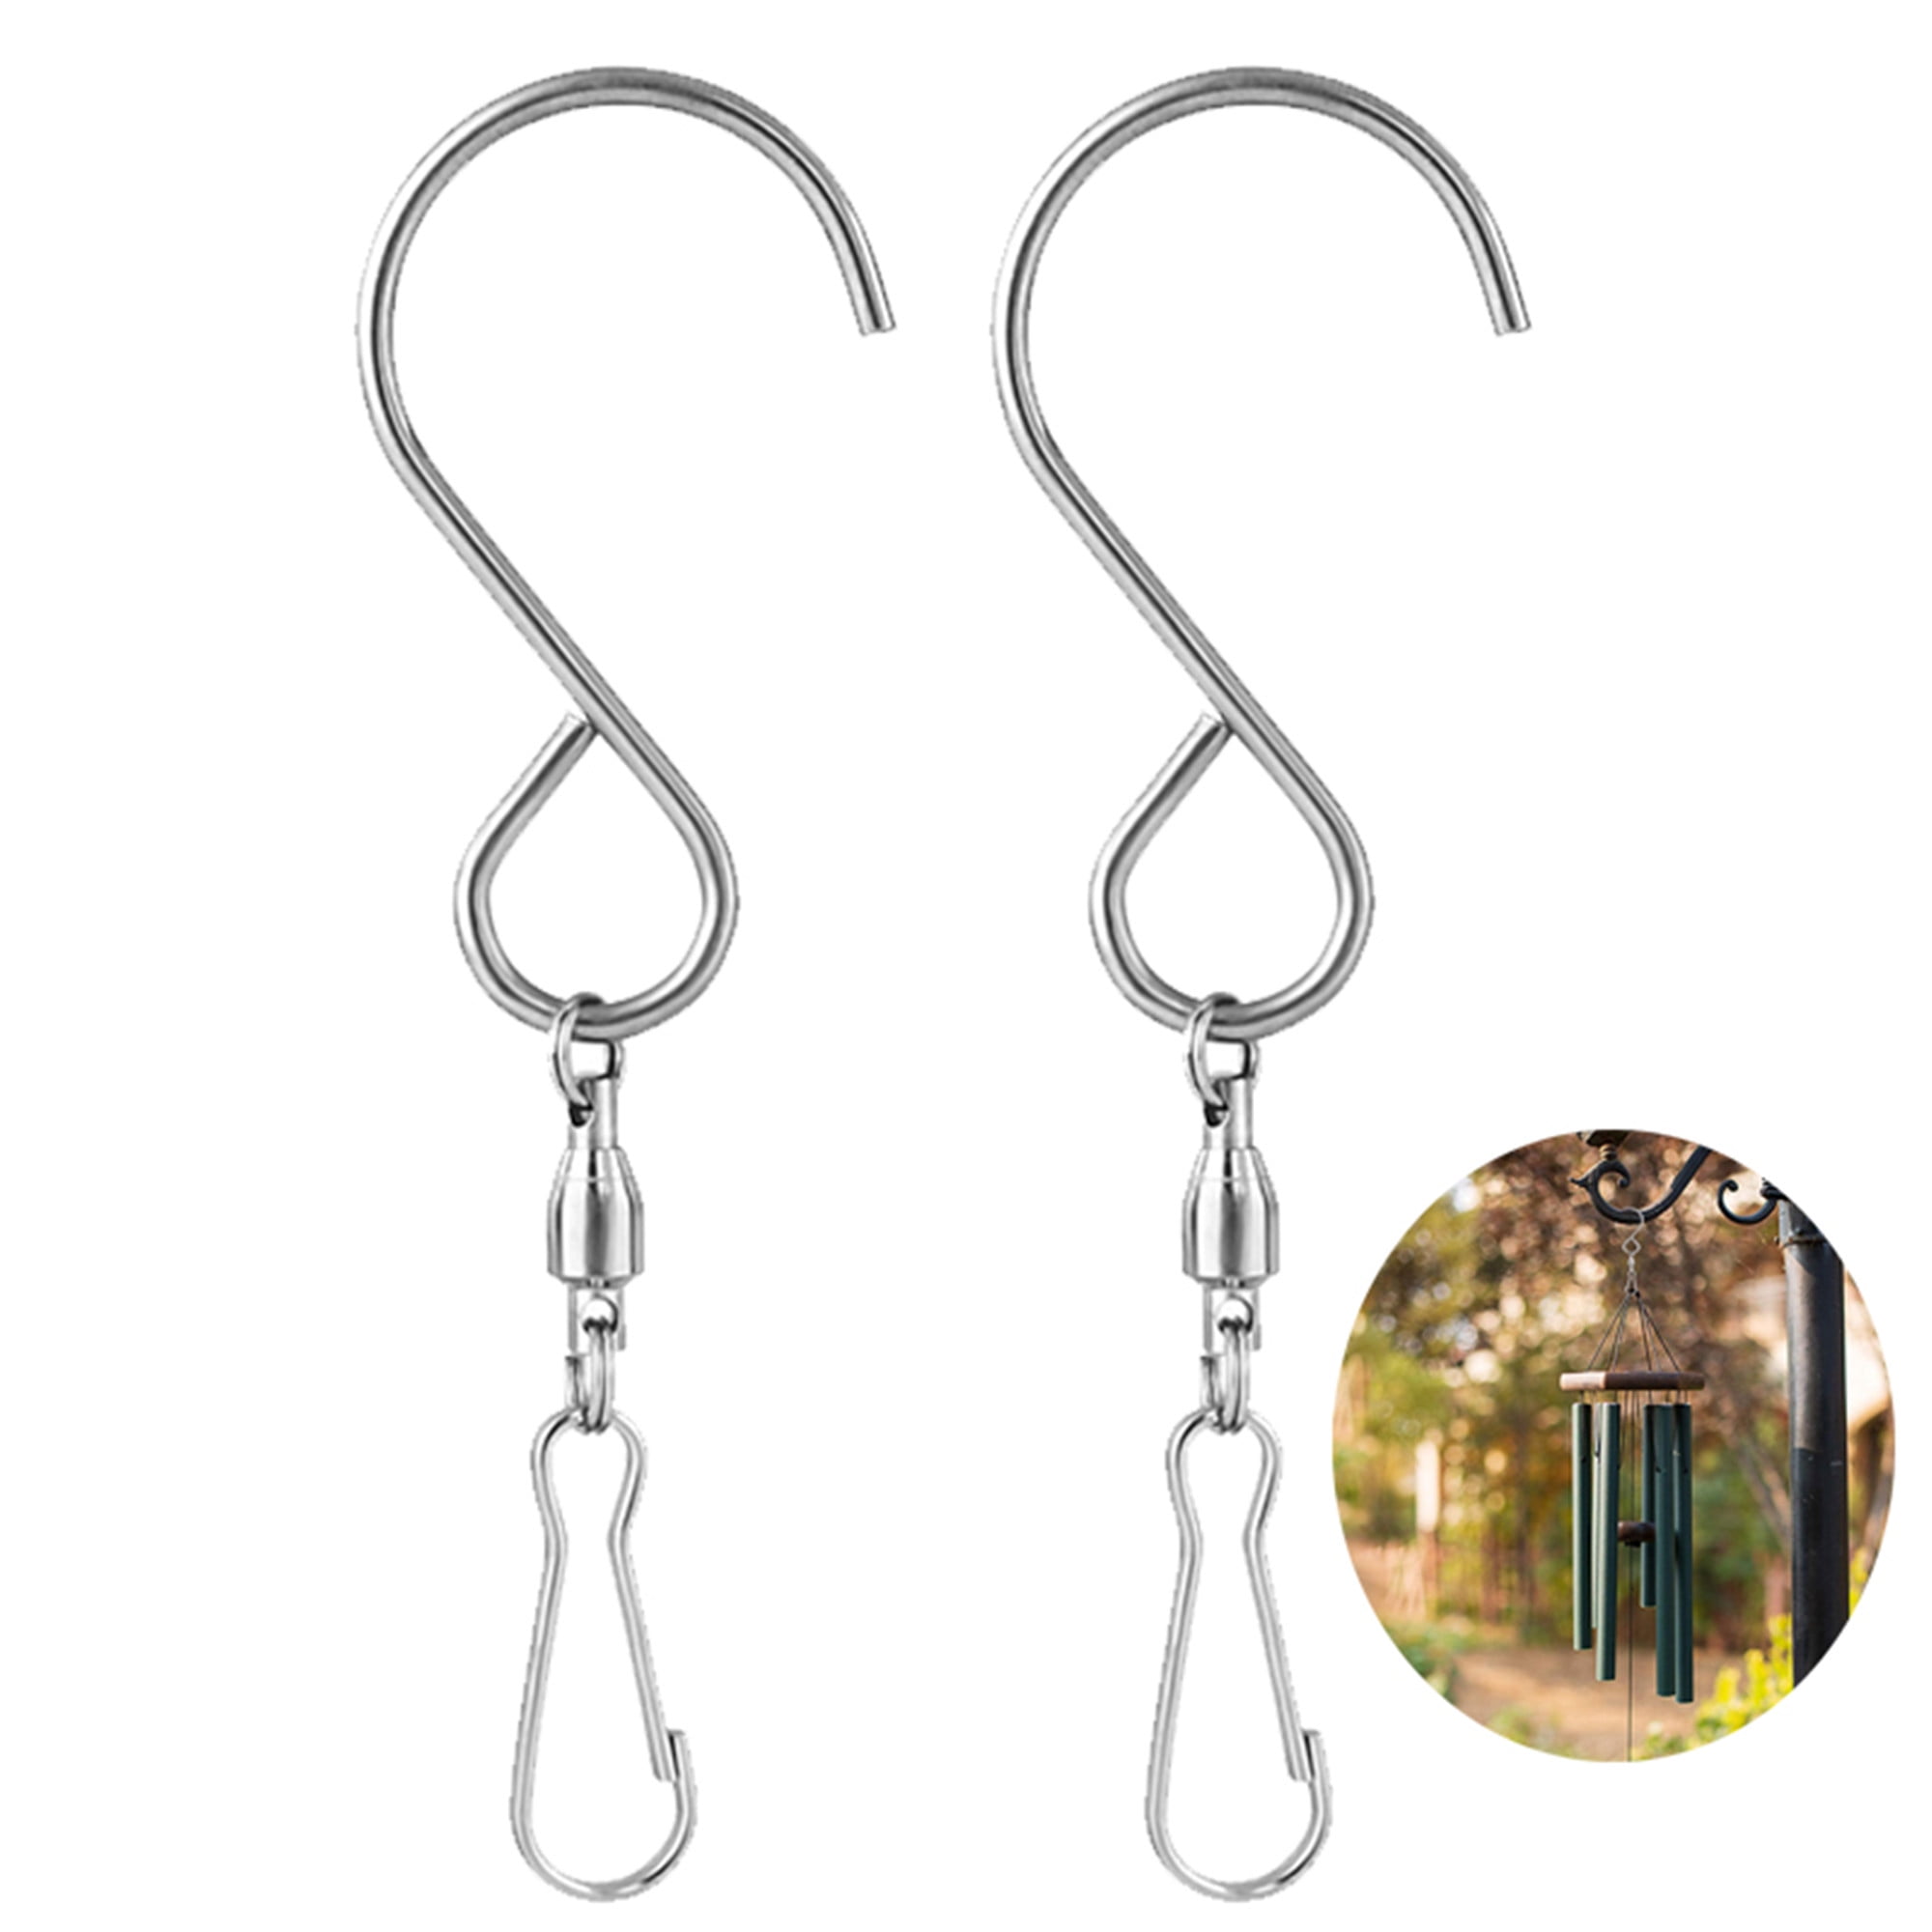 Elbourn Swivel Hooks Clips for Hanging Lanterns Wind Spinners Wind